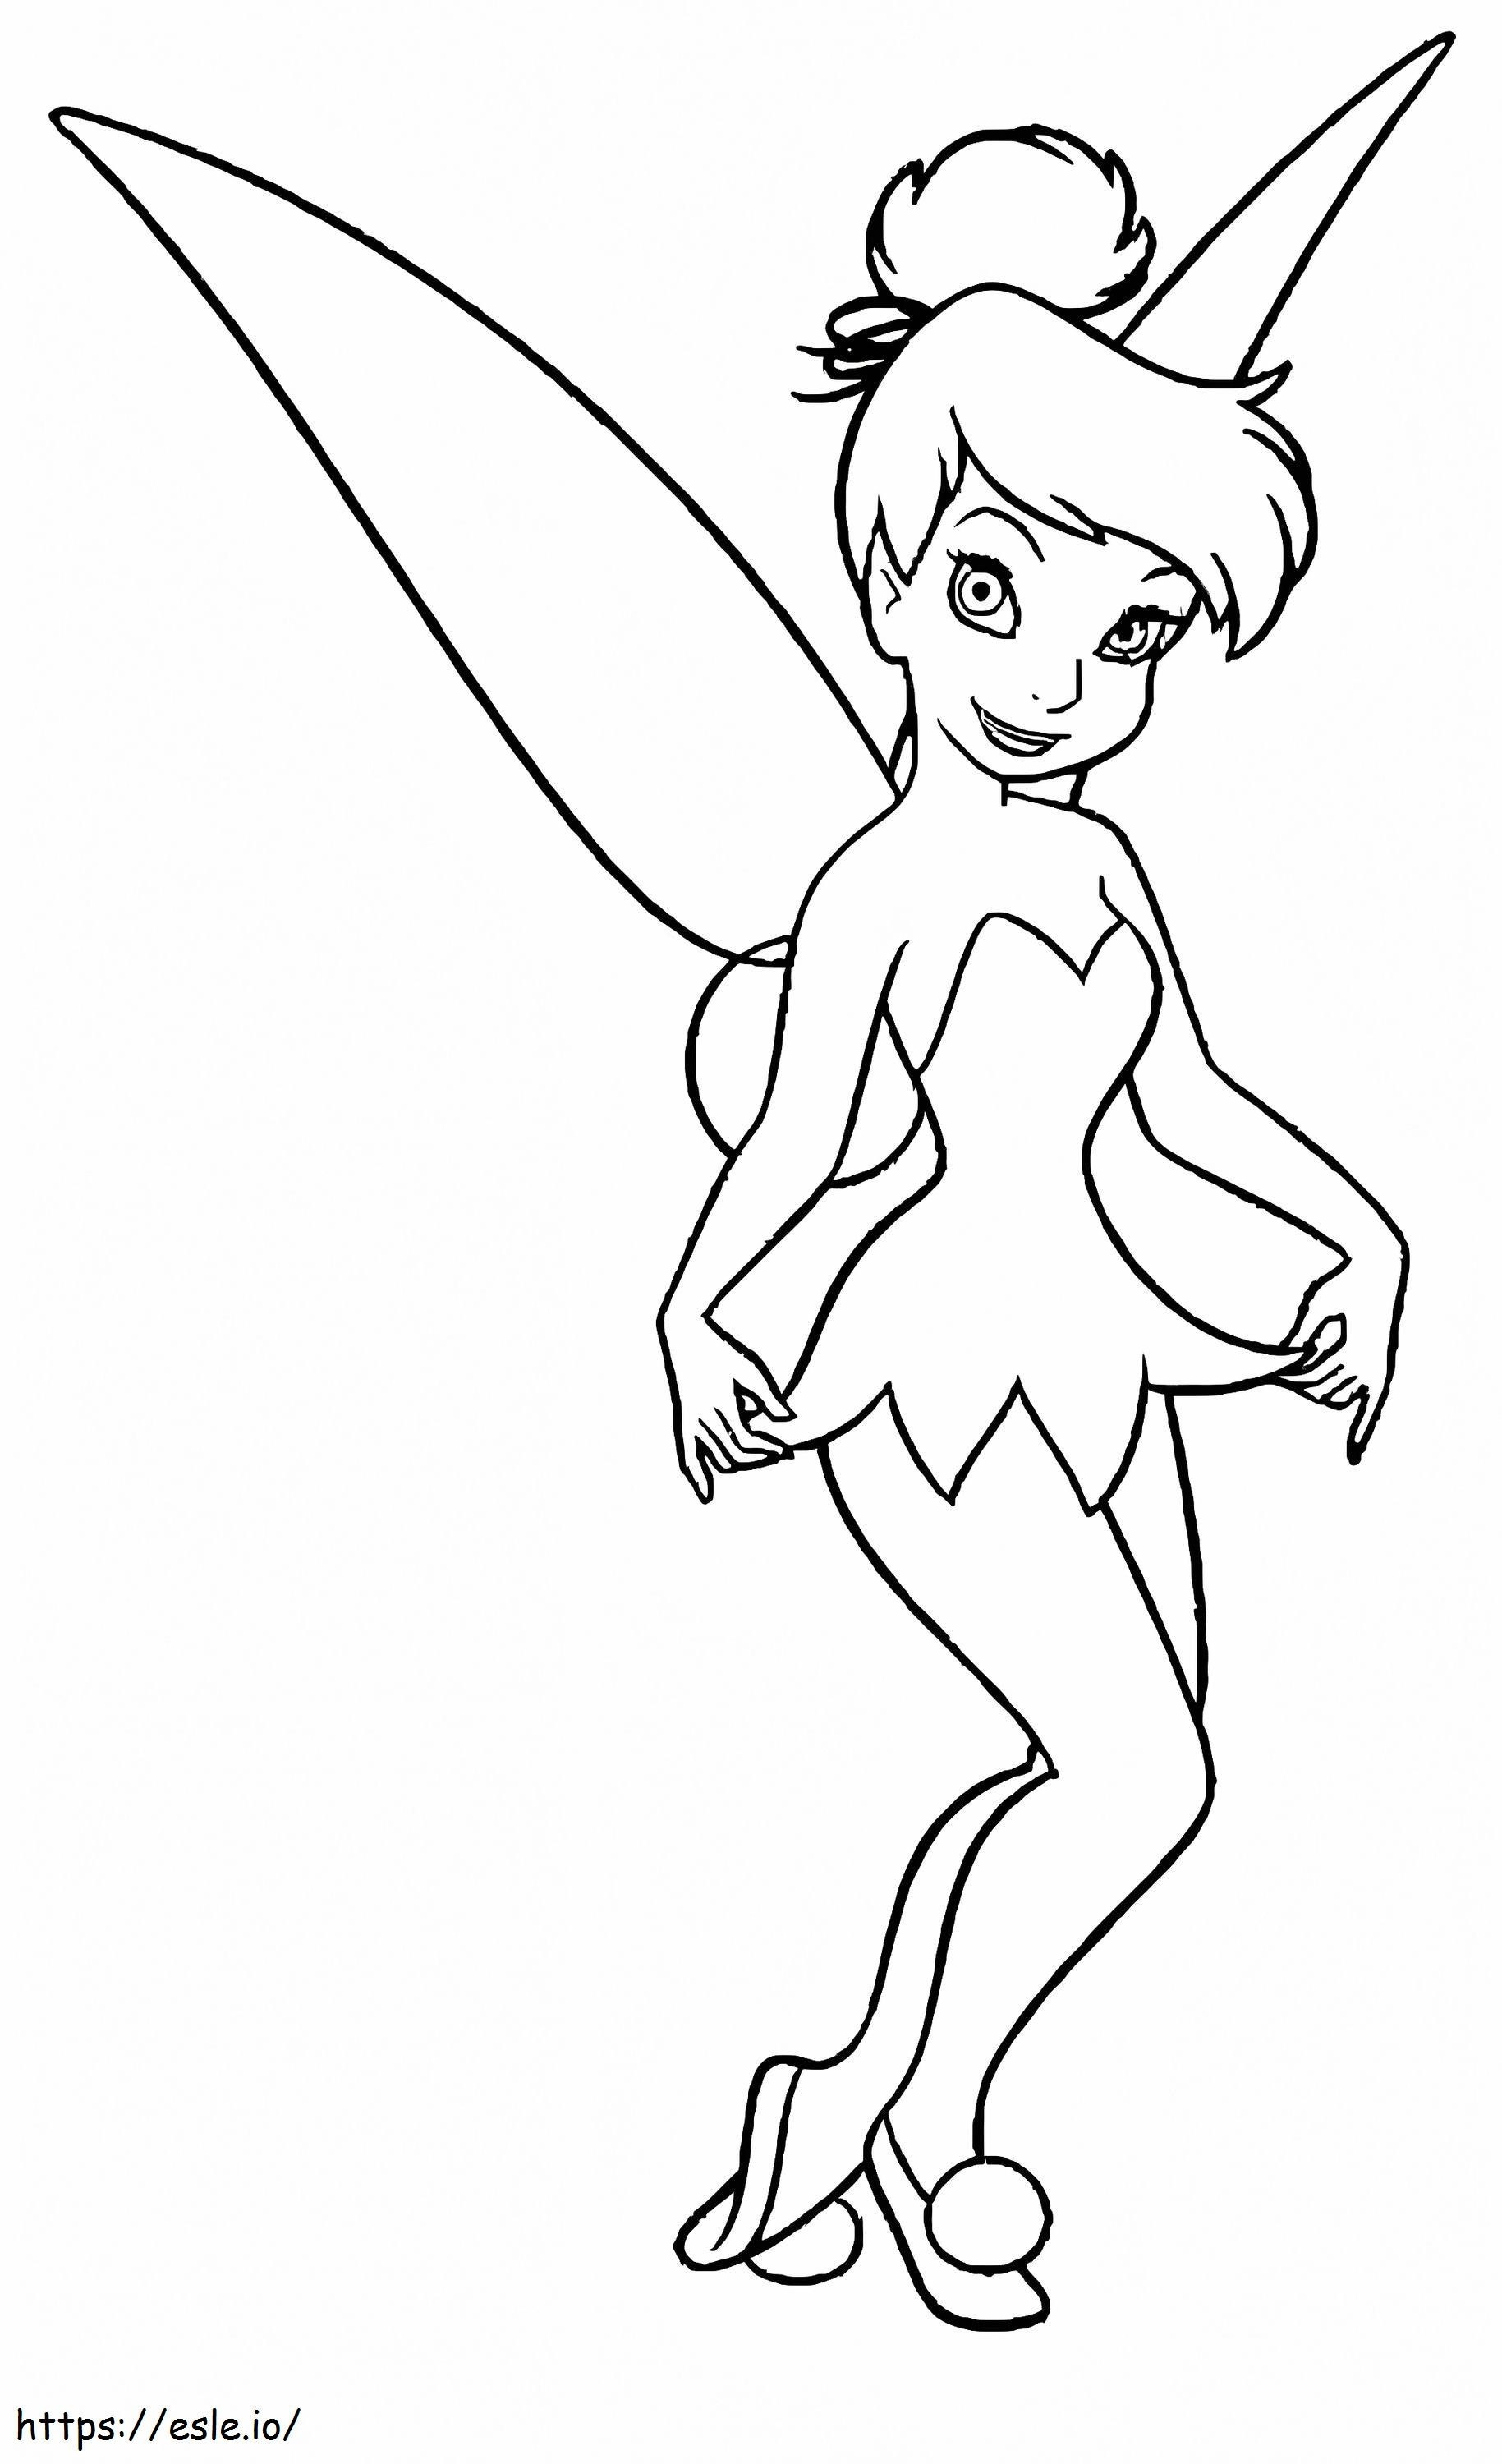 Lindo Tinkerbell coloring page